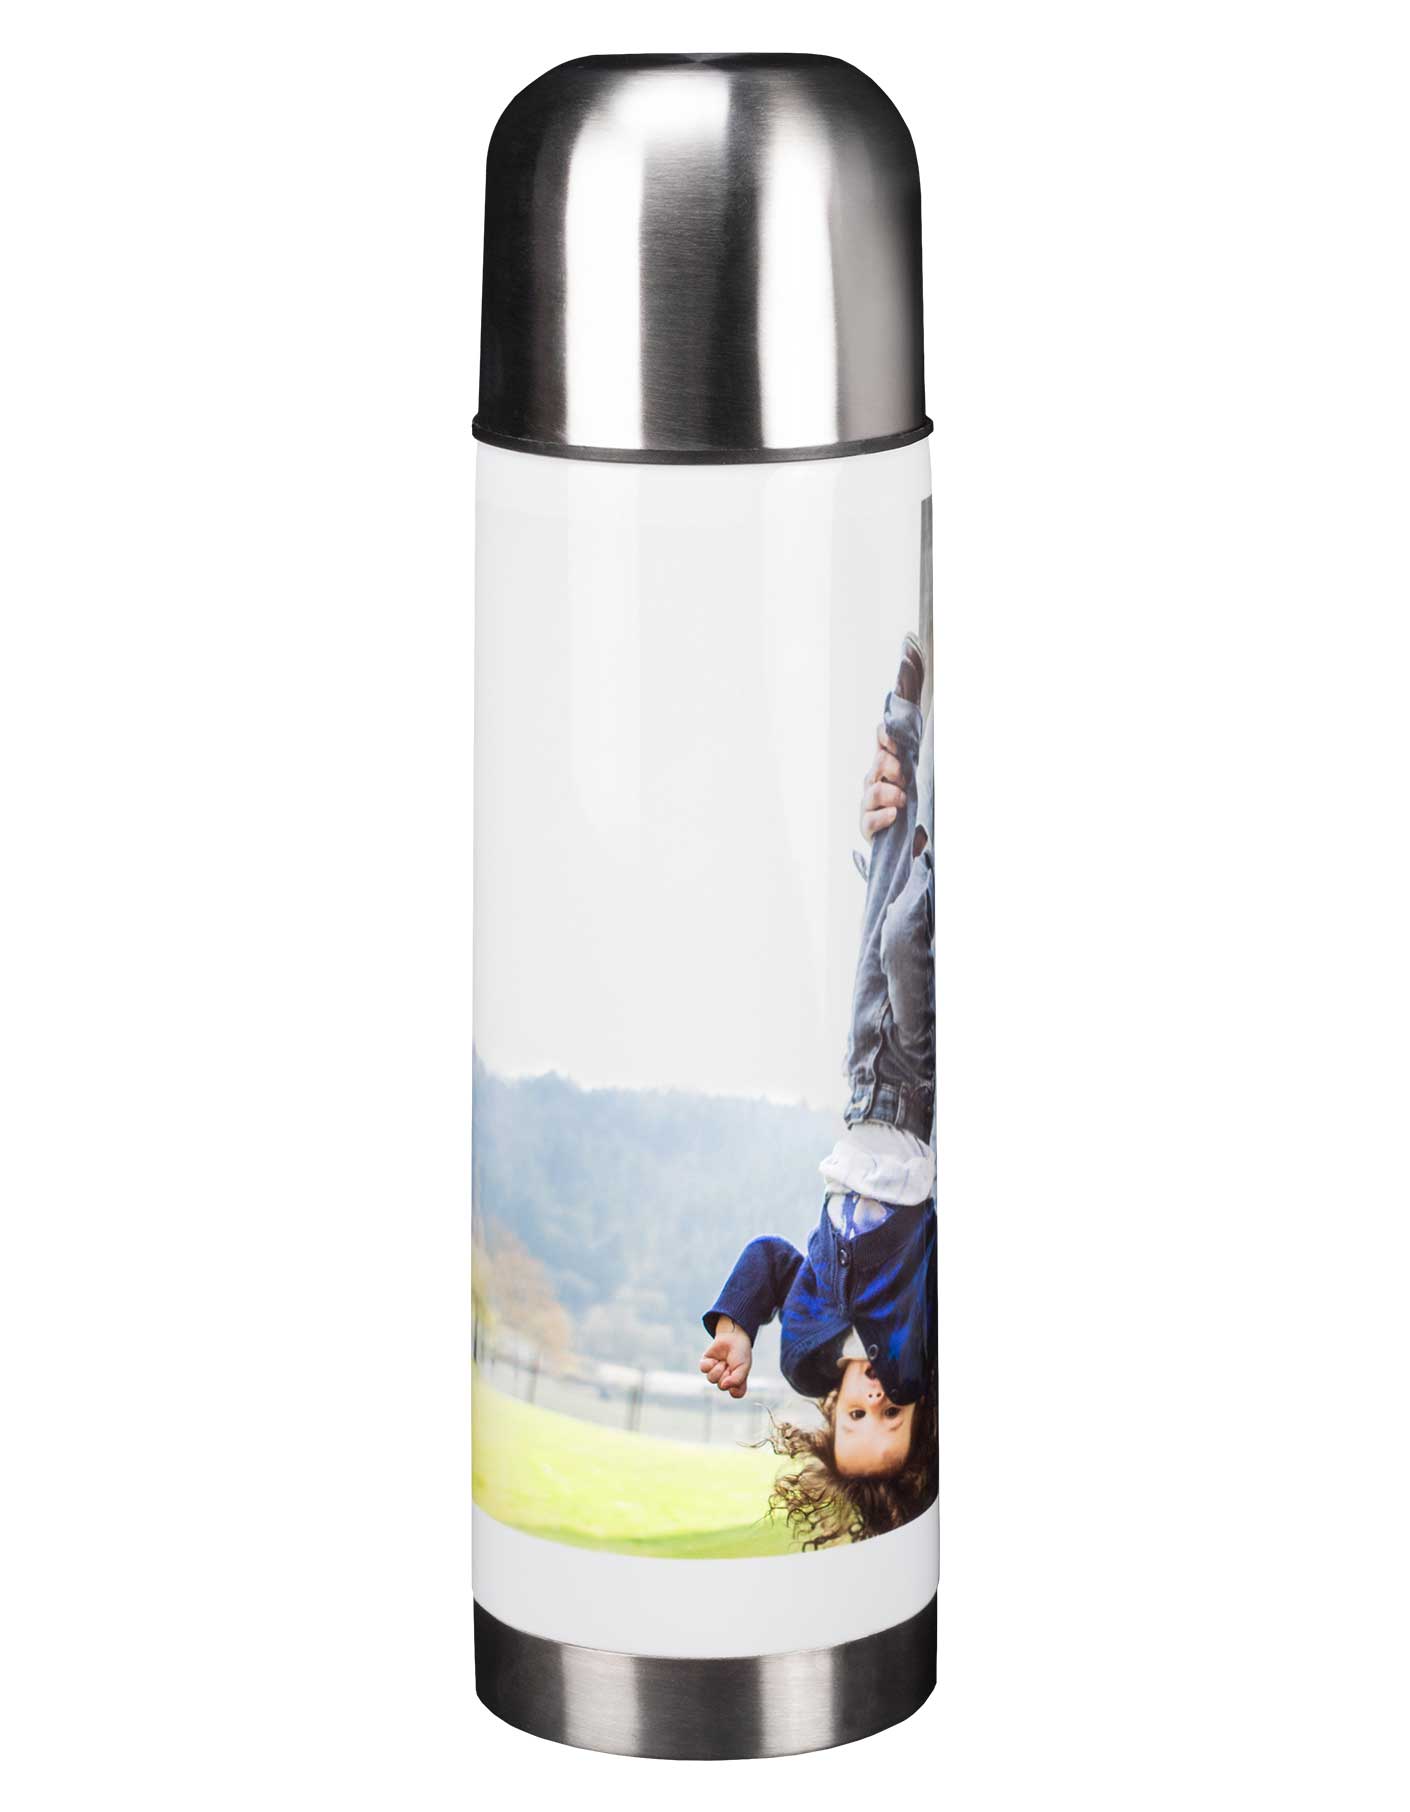 https://www.goodprints.com/wp-content/uploads/2019/09/personlaized-stainless-steel-thermos.jpg